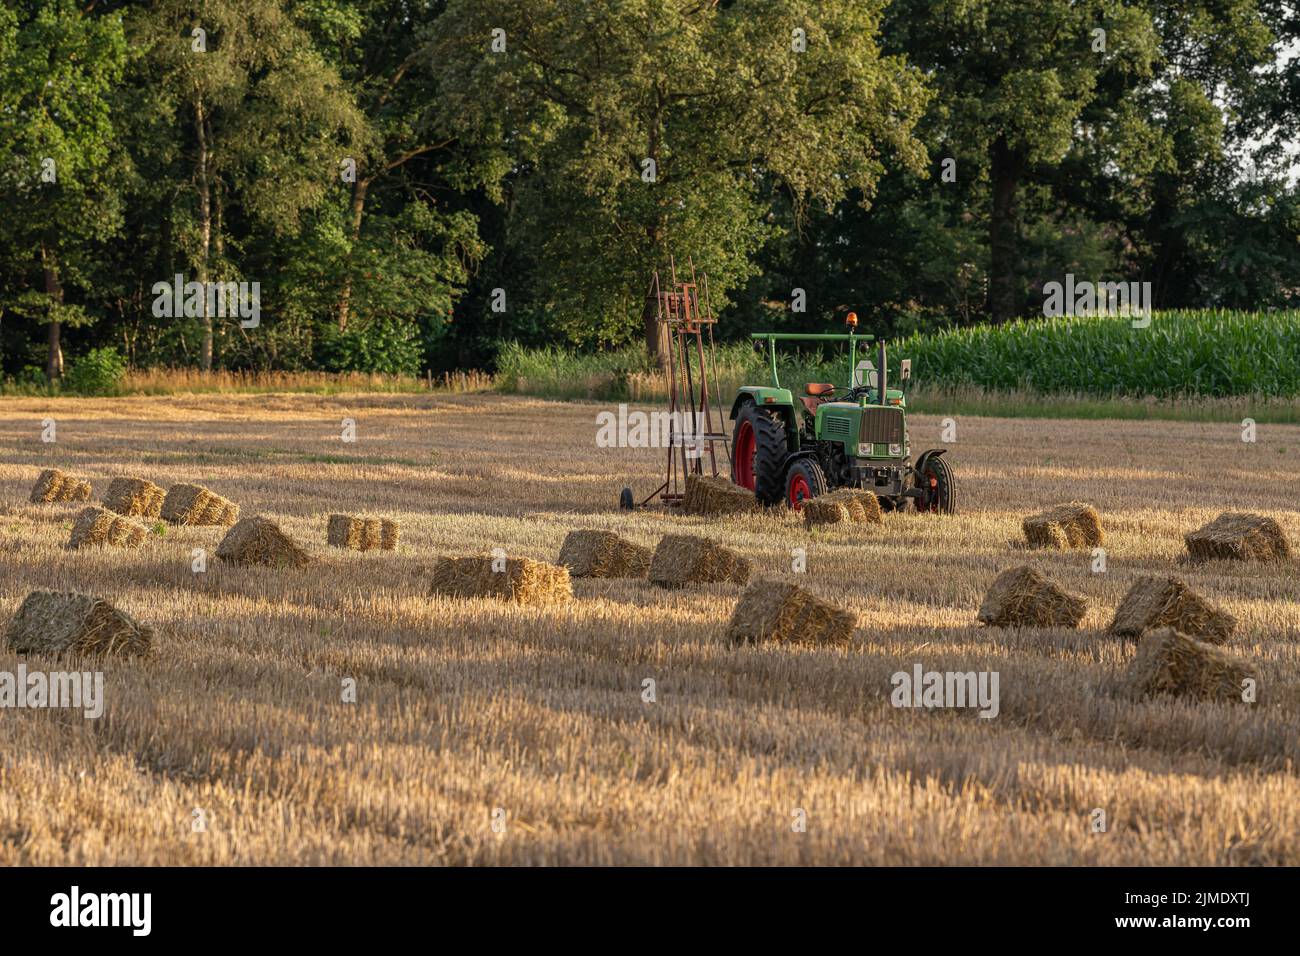 Old tractor in a field with straw bales Stock Photo